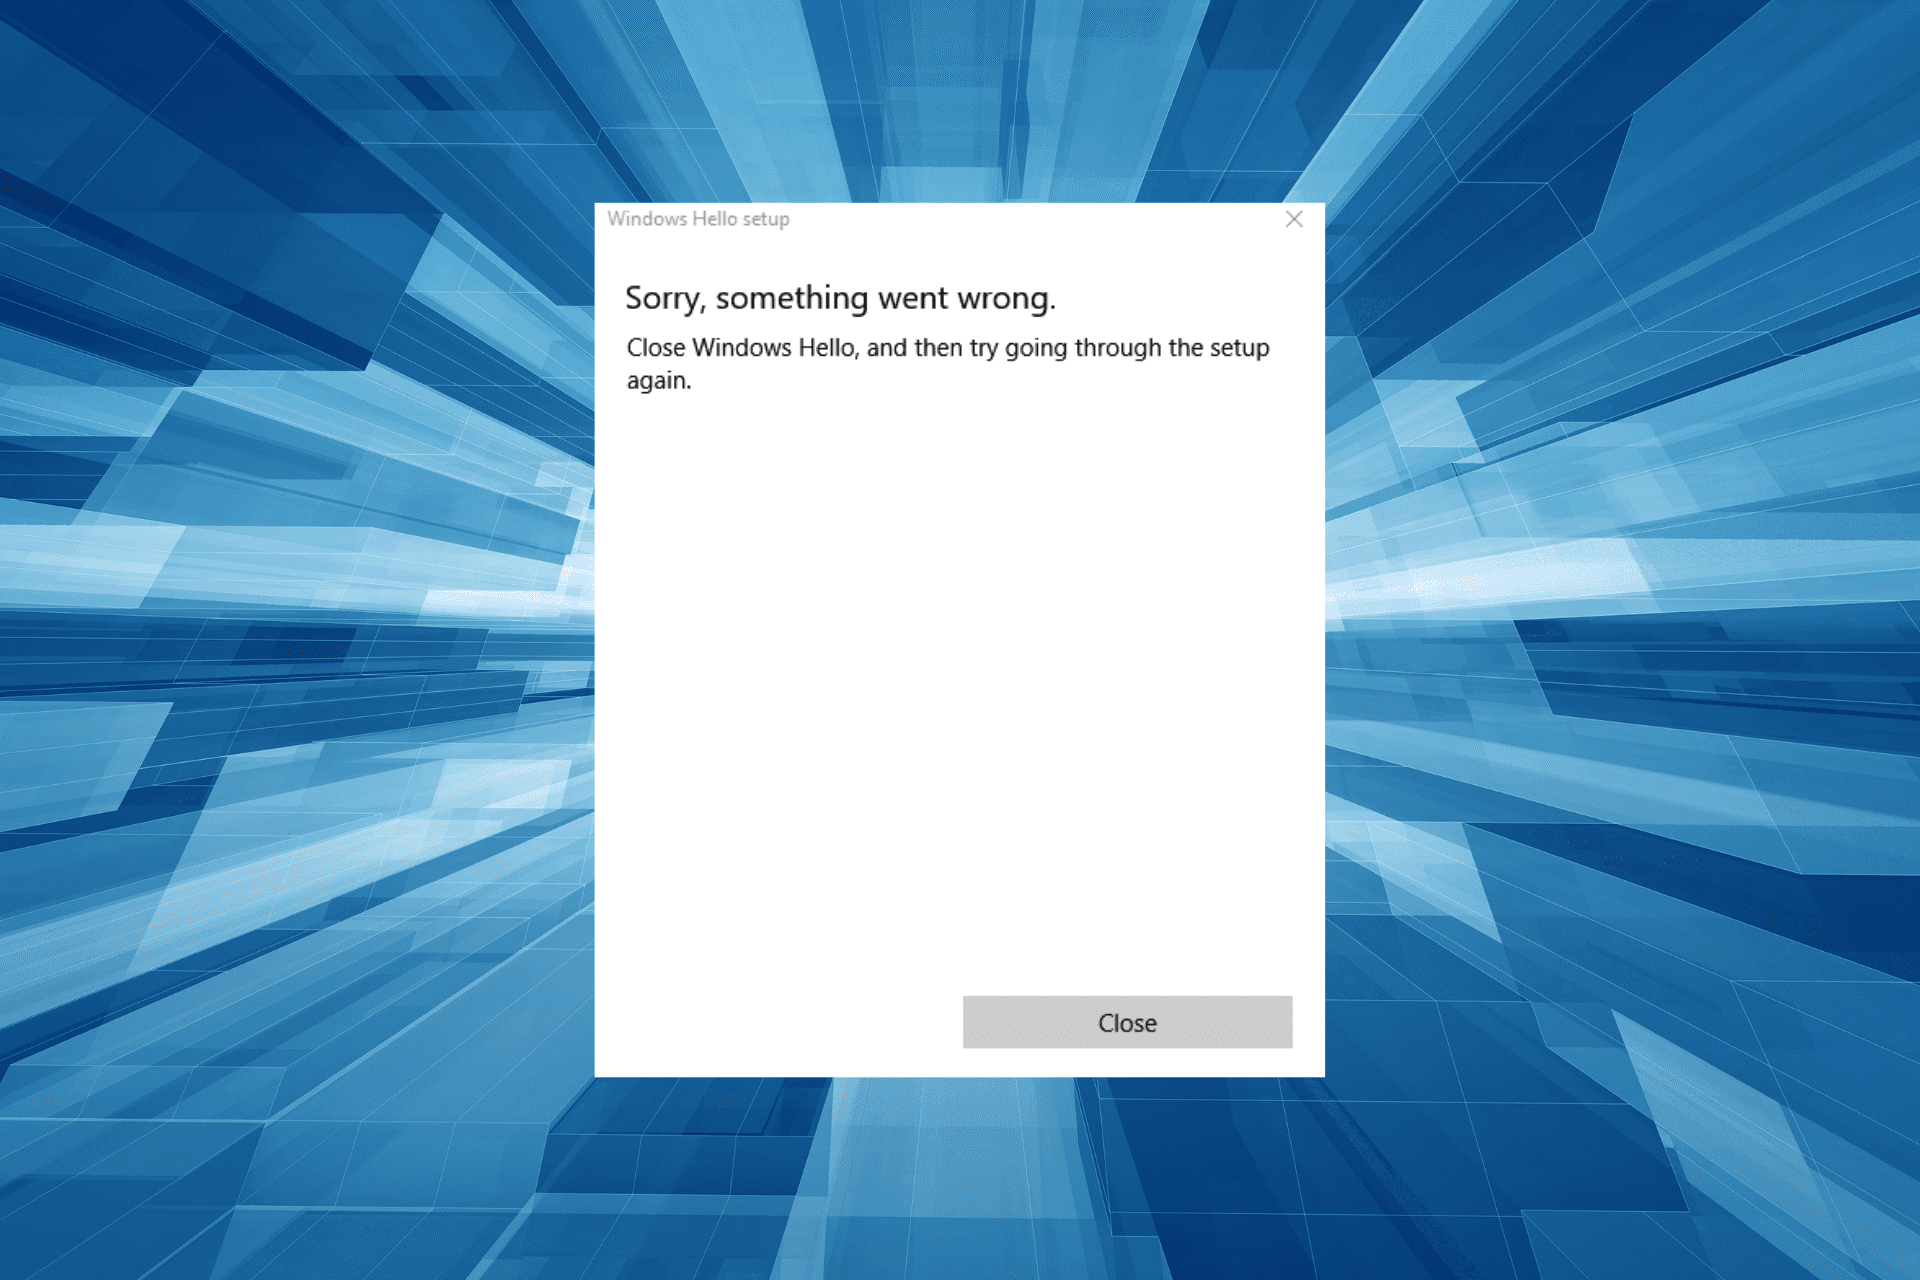 fix close windows hello and then try going through the setup again error in Windows 10